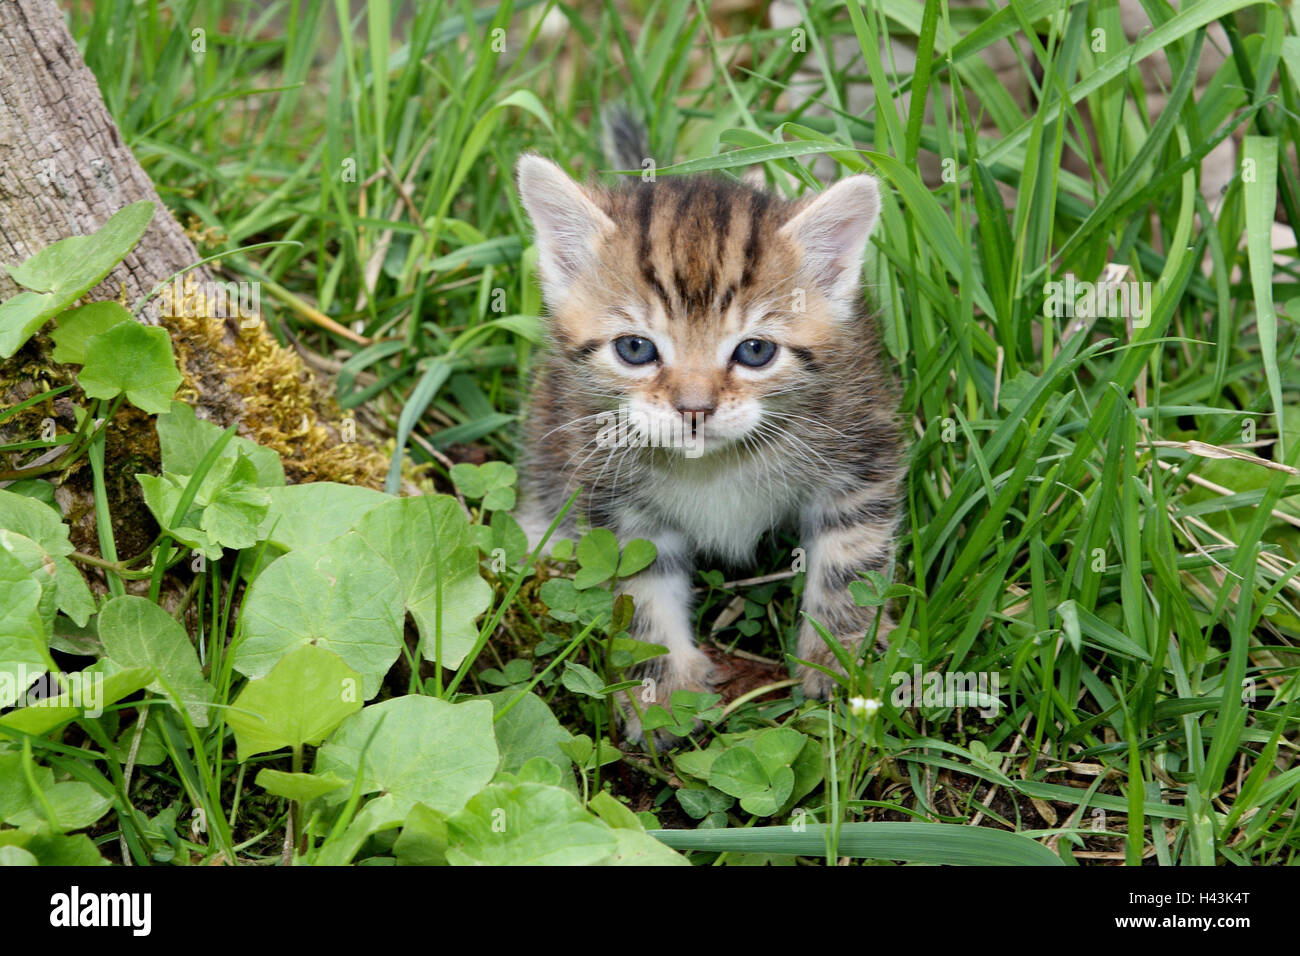 Cat, young, run, meadow, garden, animals, mammals, pets, small cats, Felidae, domesticates, house cat, young animal, kitten, small, awkward, clumsy, helplessly, sweetly, striped, play, curiosity, plants, individually, alone, young animals, animal baby, nature, outside, Stock Photo